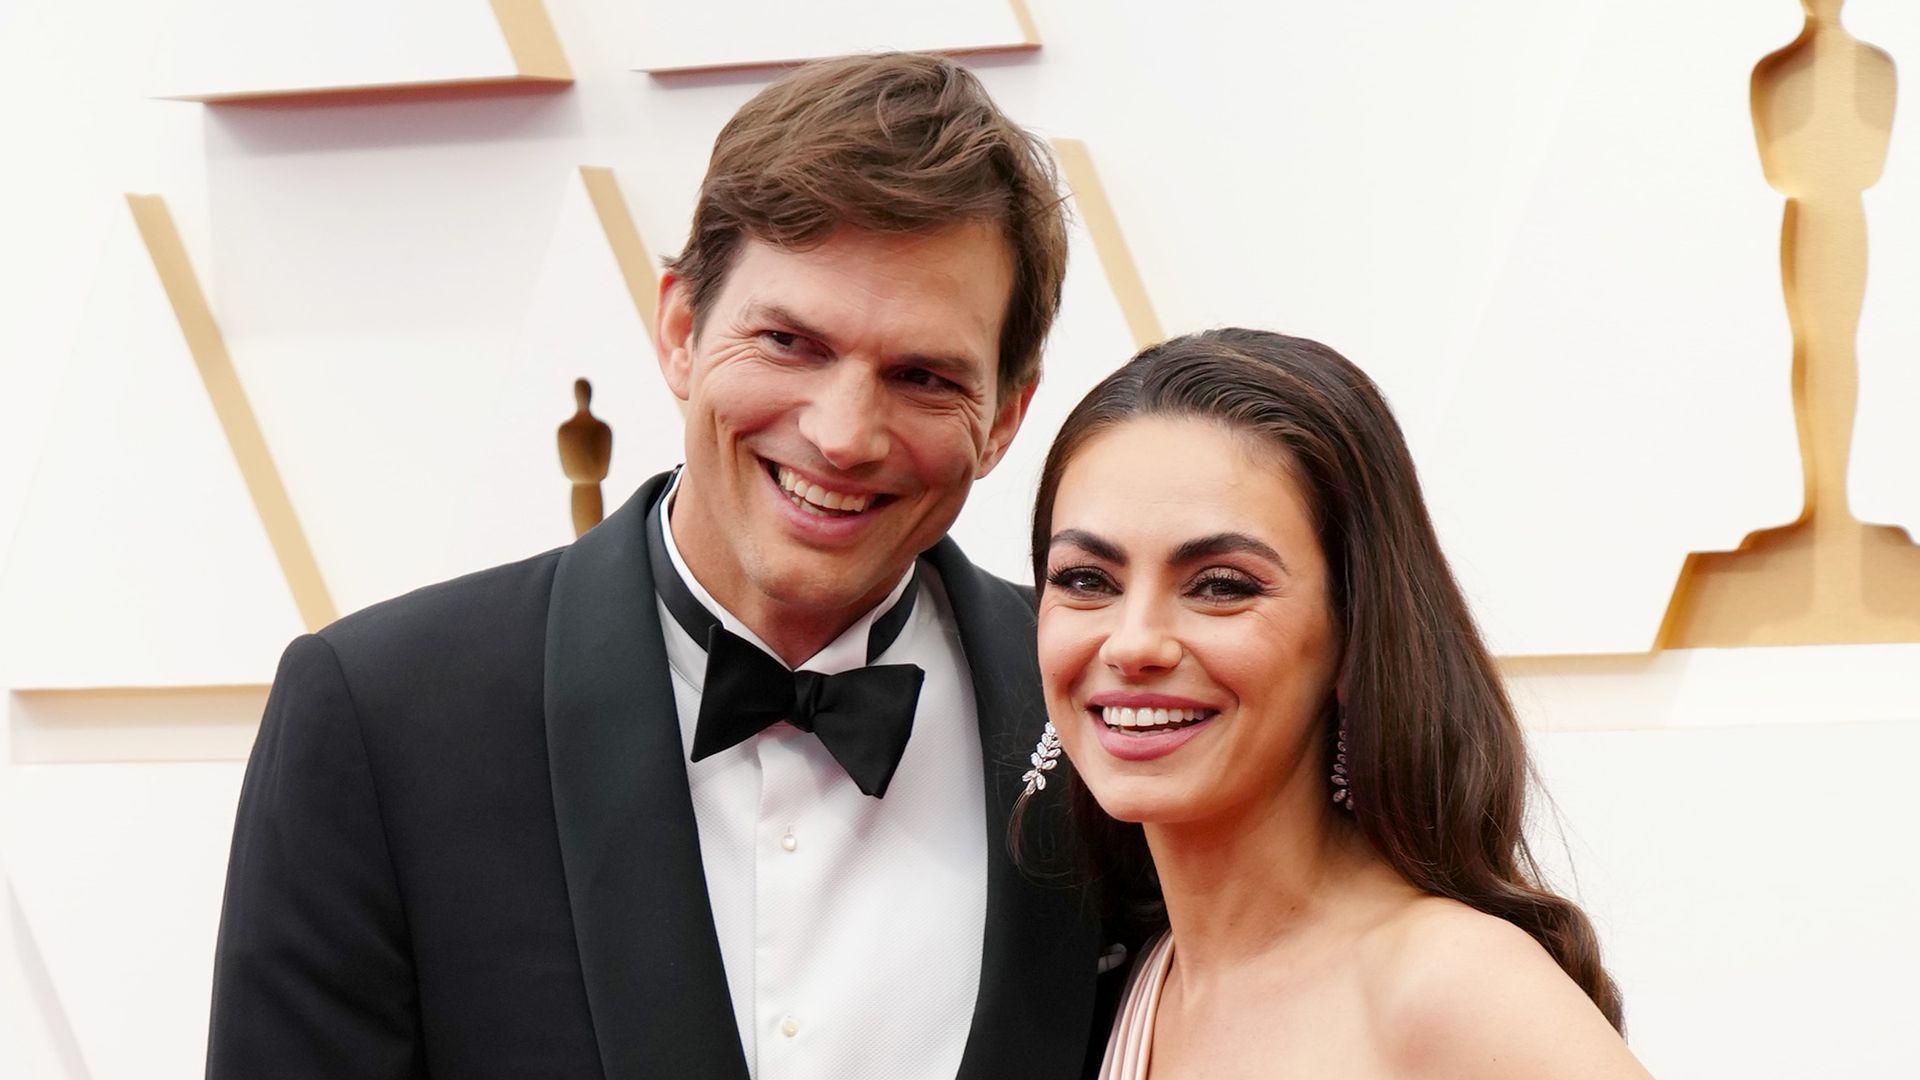 Mila Kunis and Ashton Kutcher's kids look just like them in adorable new photos from first public appearance